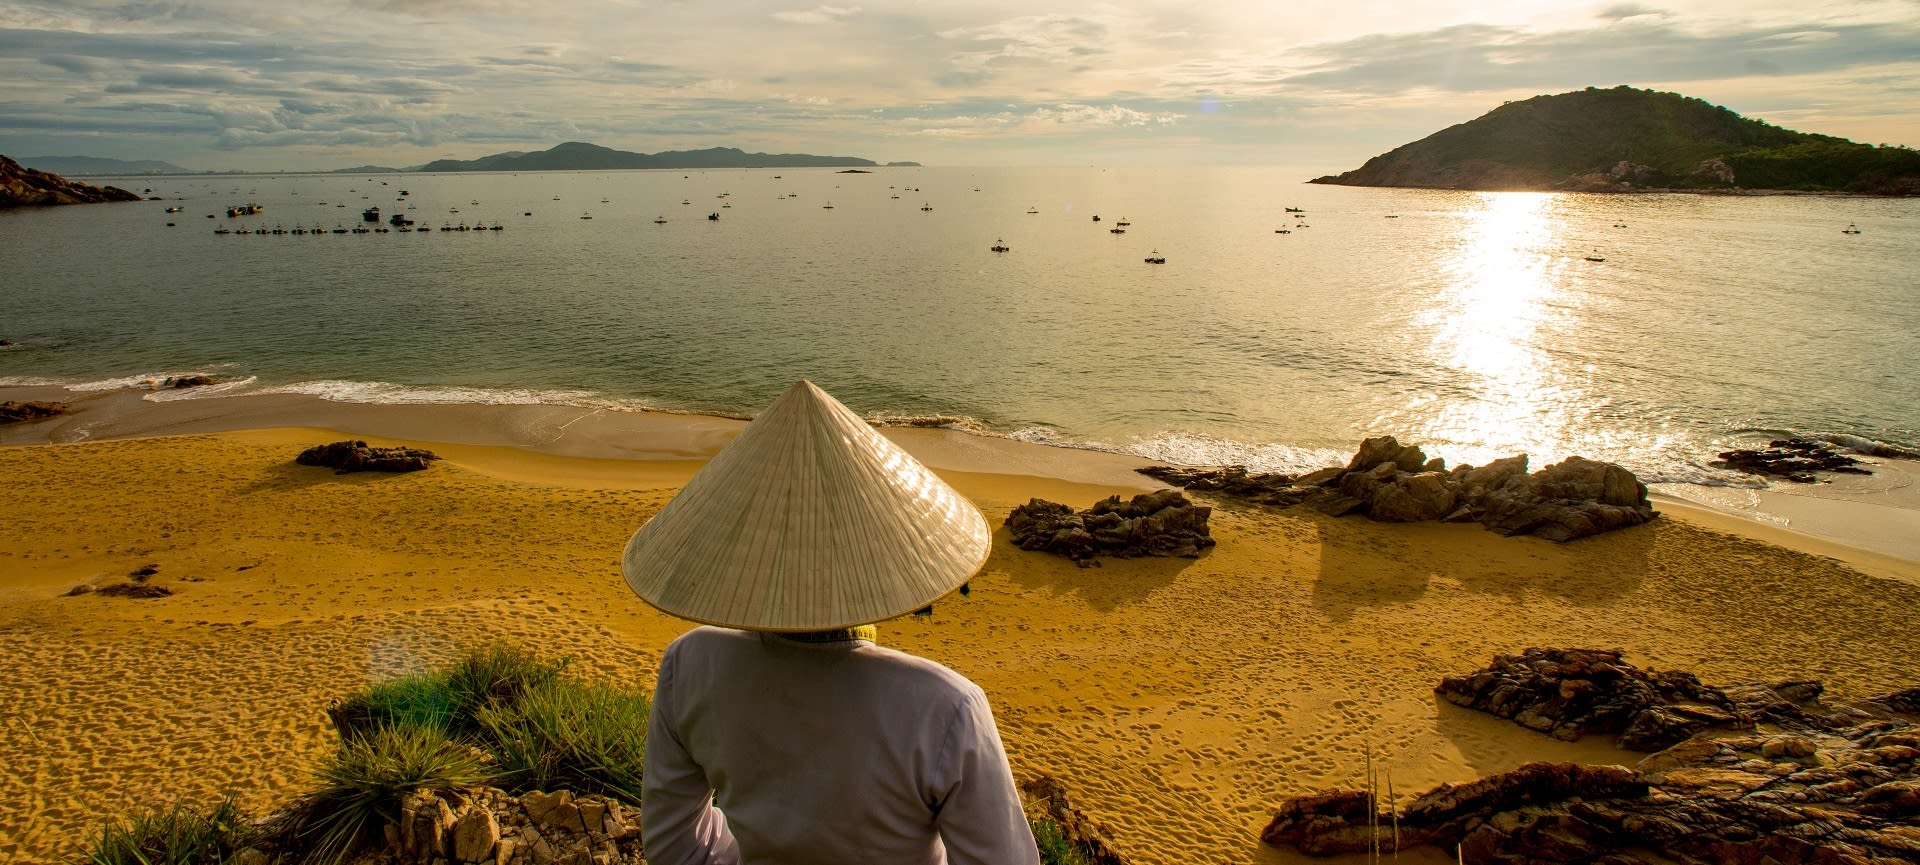 Exterior view lady in conical hat watching Quy Nhon beach sunrise